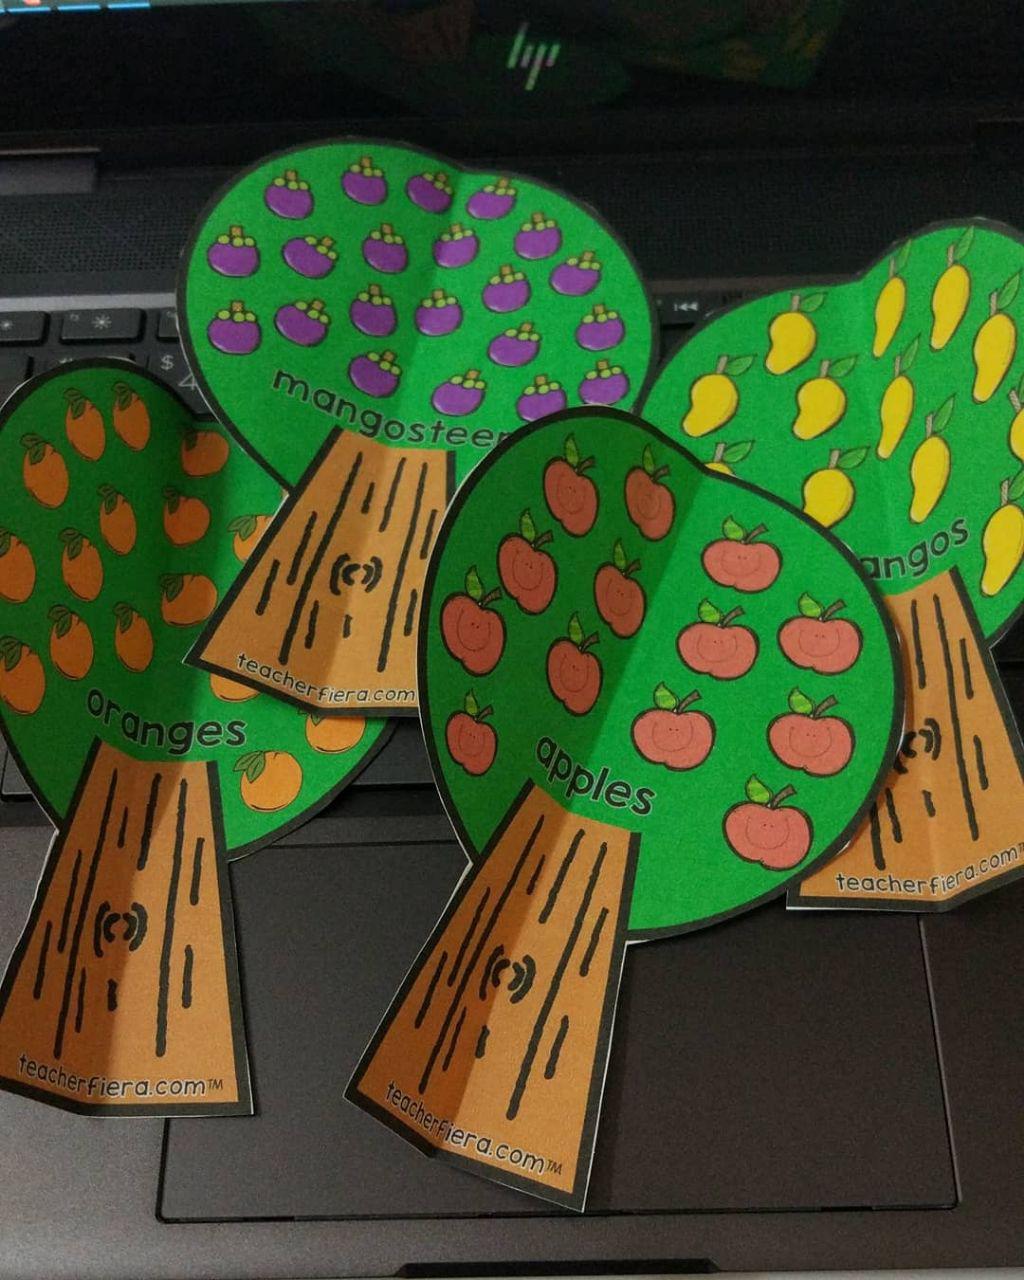 teacherfiera.com: YEAR 1 UNIT 4 FRUIT TREES CRAFT - WHAT ARE THE FRUITS ...